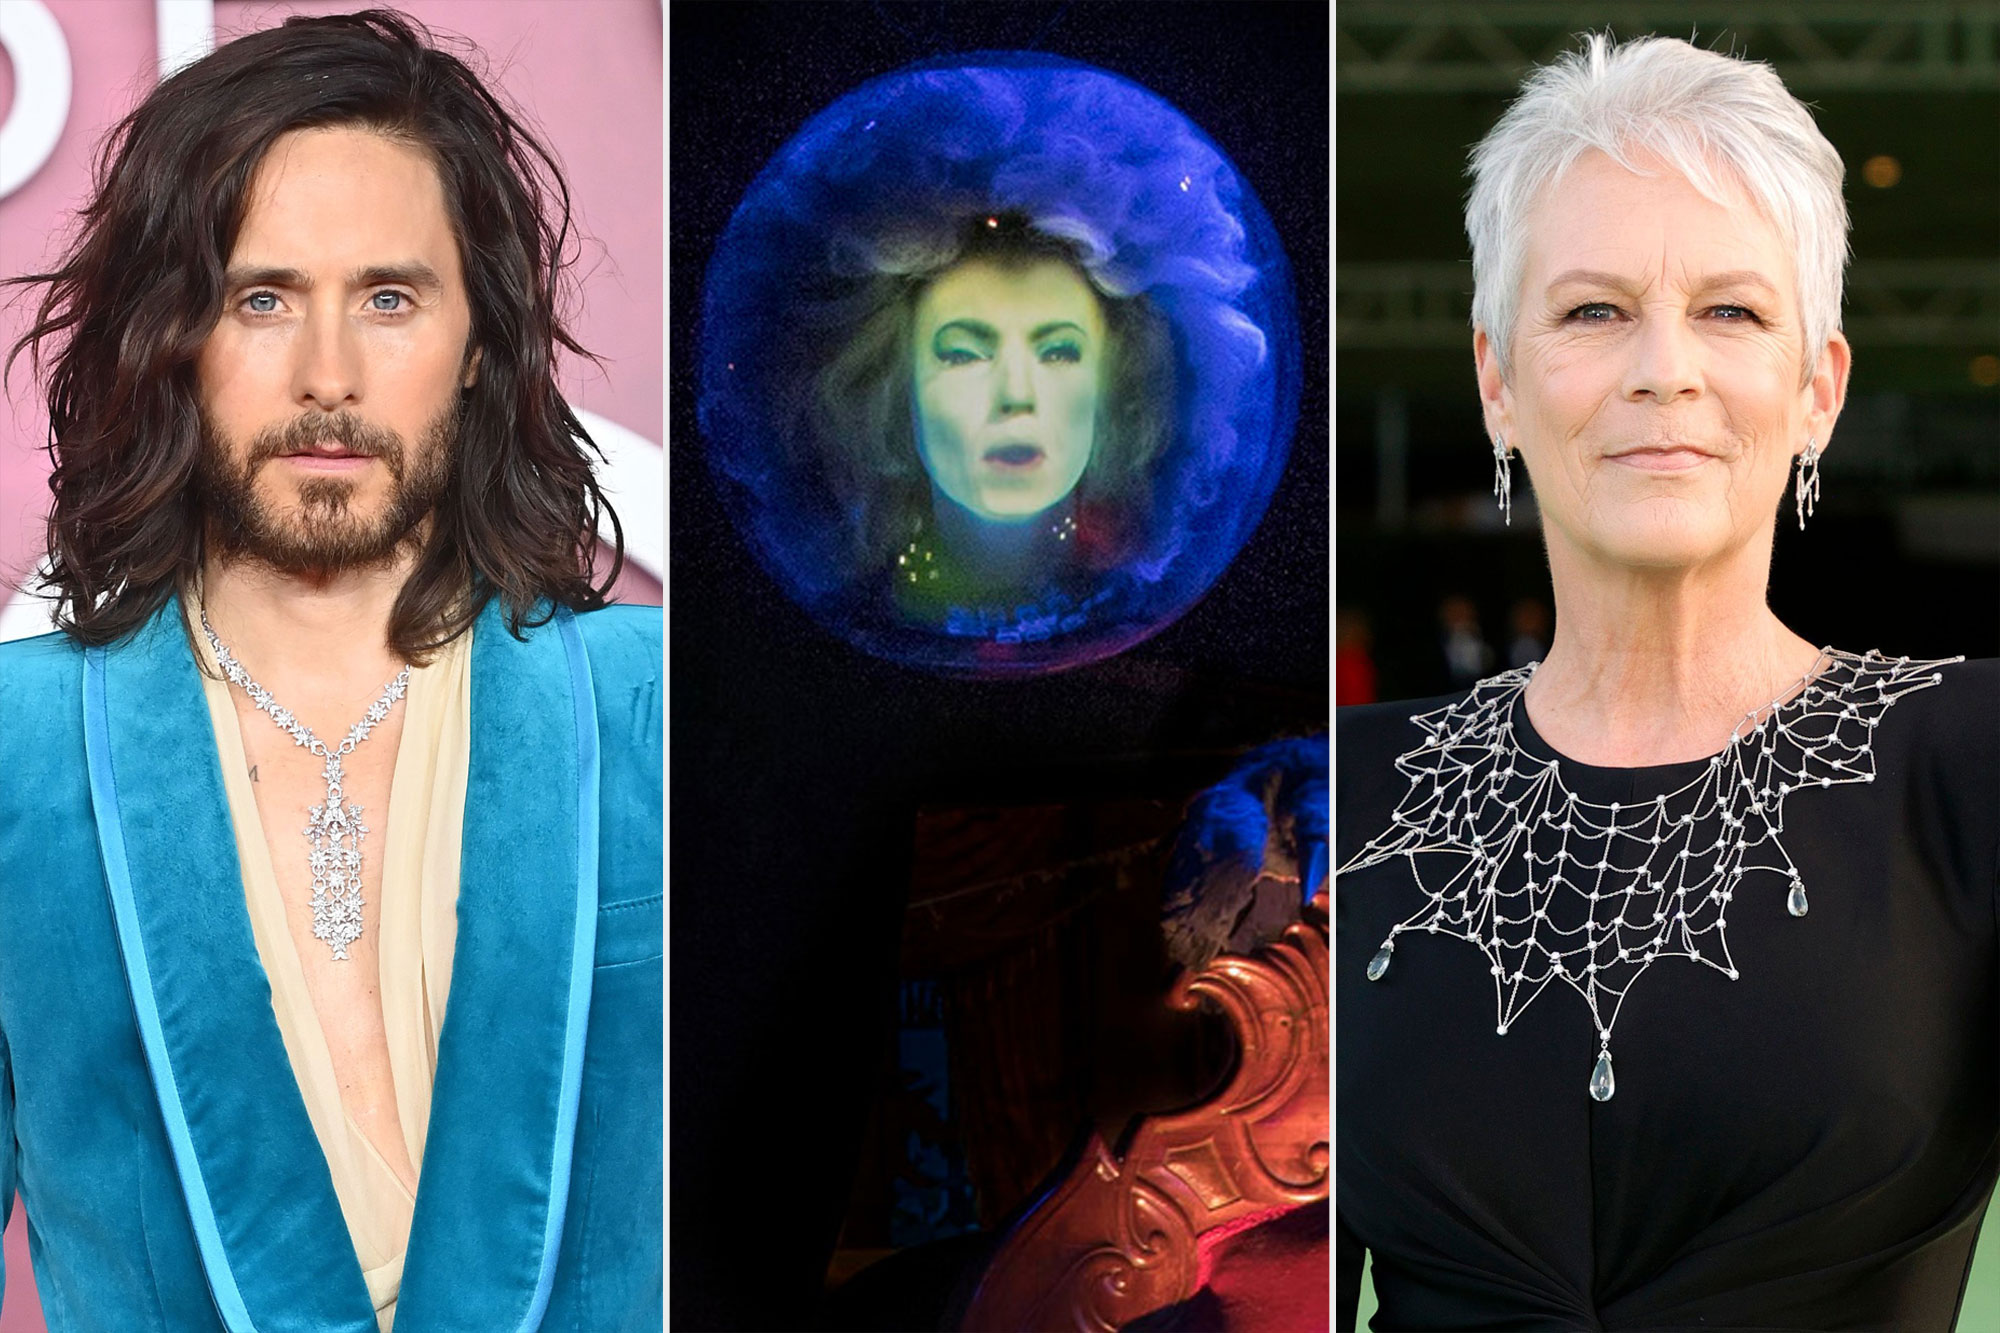 Disney's Haunted Mansion movie adds Jared Leto, Jamie Lee Curtis as happy haunts from the ride